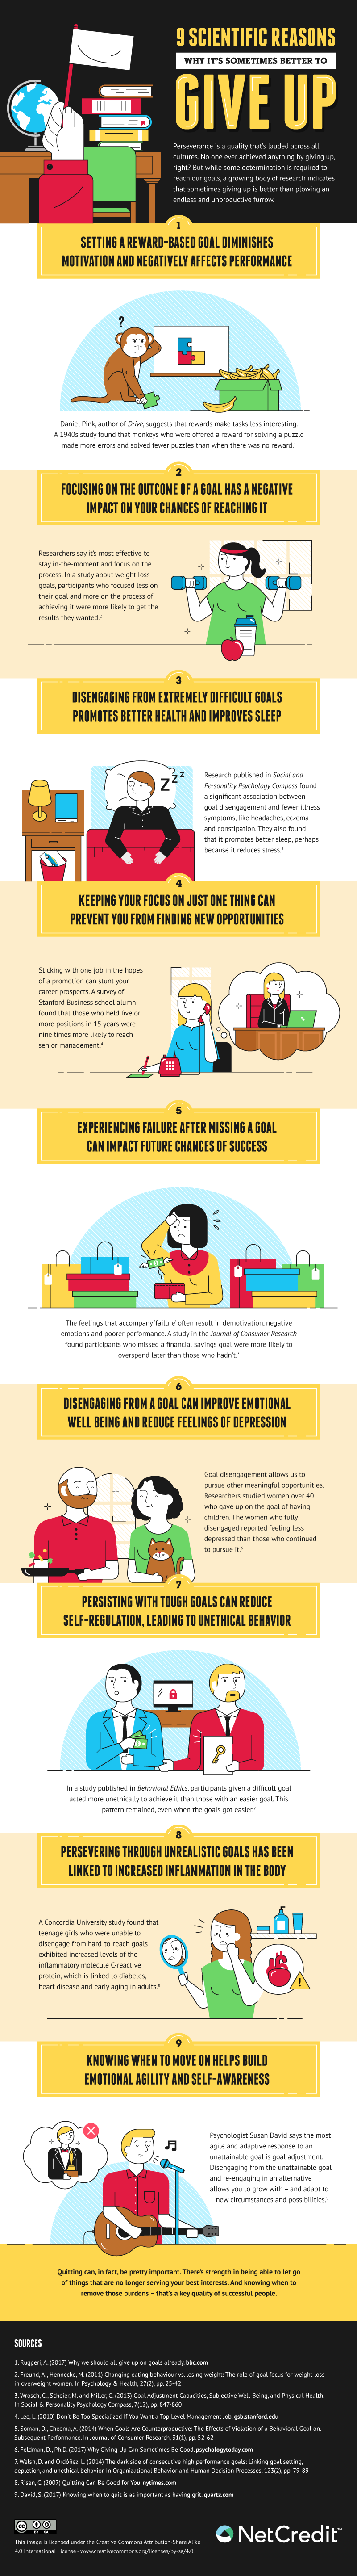 Infographic 9 reasons why sometimes it's better to give up